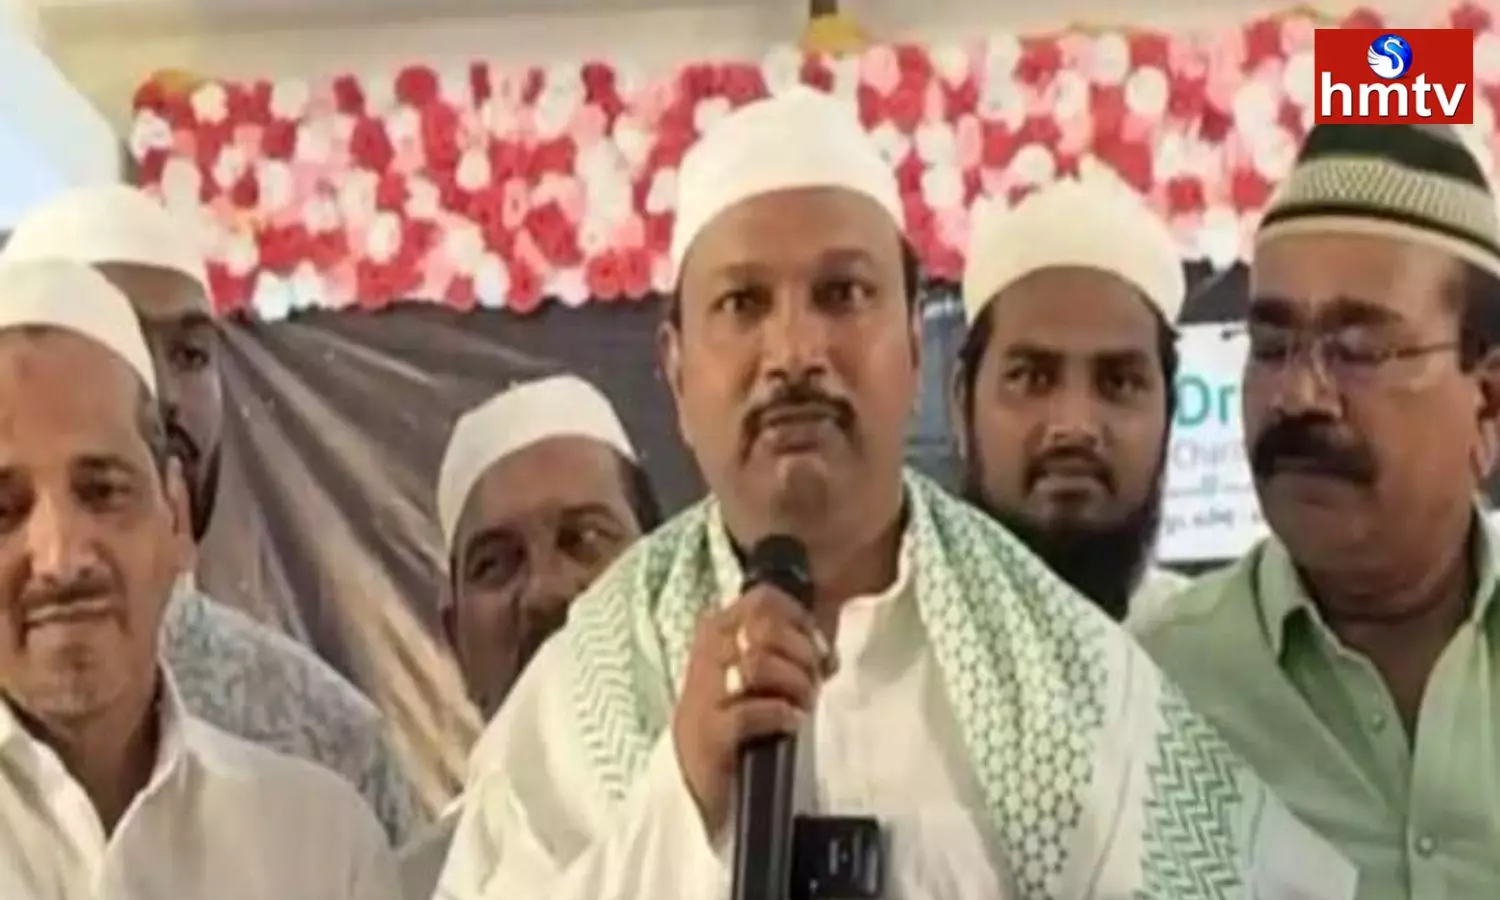 Telangana Health Director DH Srinivas Rao Again Makes Controversial Comments At Iftar Party In Kothagudem